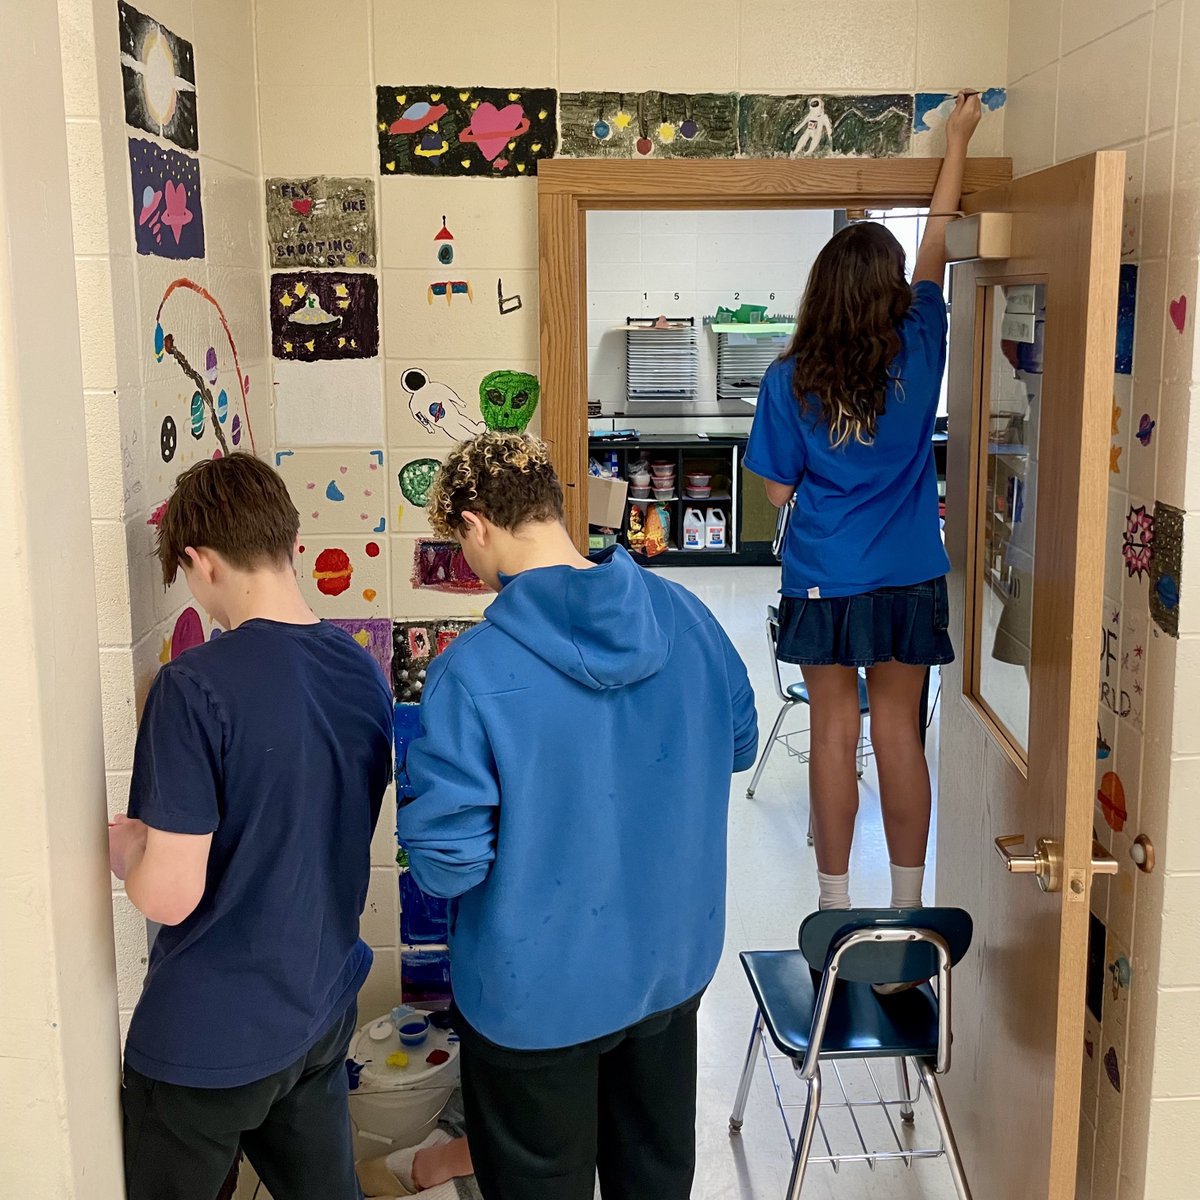 Quarter 3 eighth grade artists add their mark to our hallway mural. A visually delightful parting gift from the graduating class of 2023!

#D90Learns #D90Art